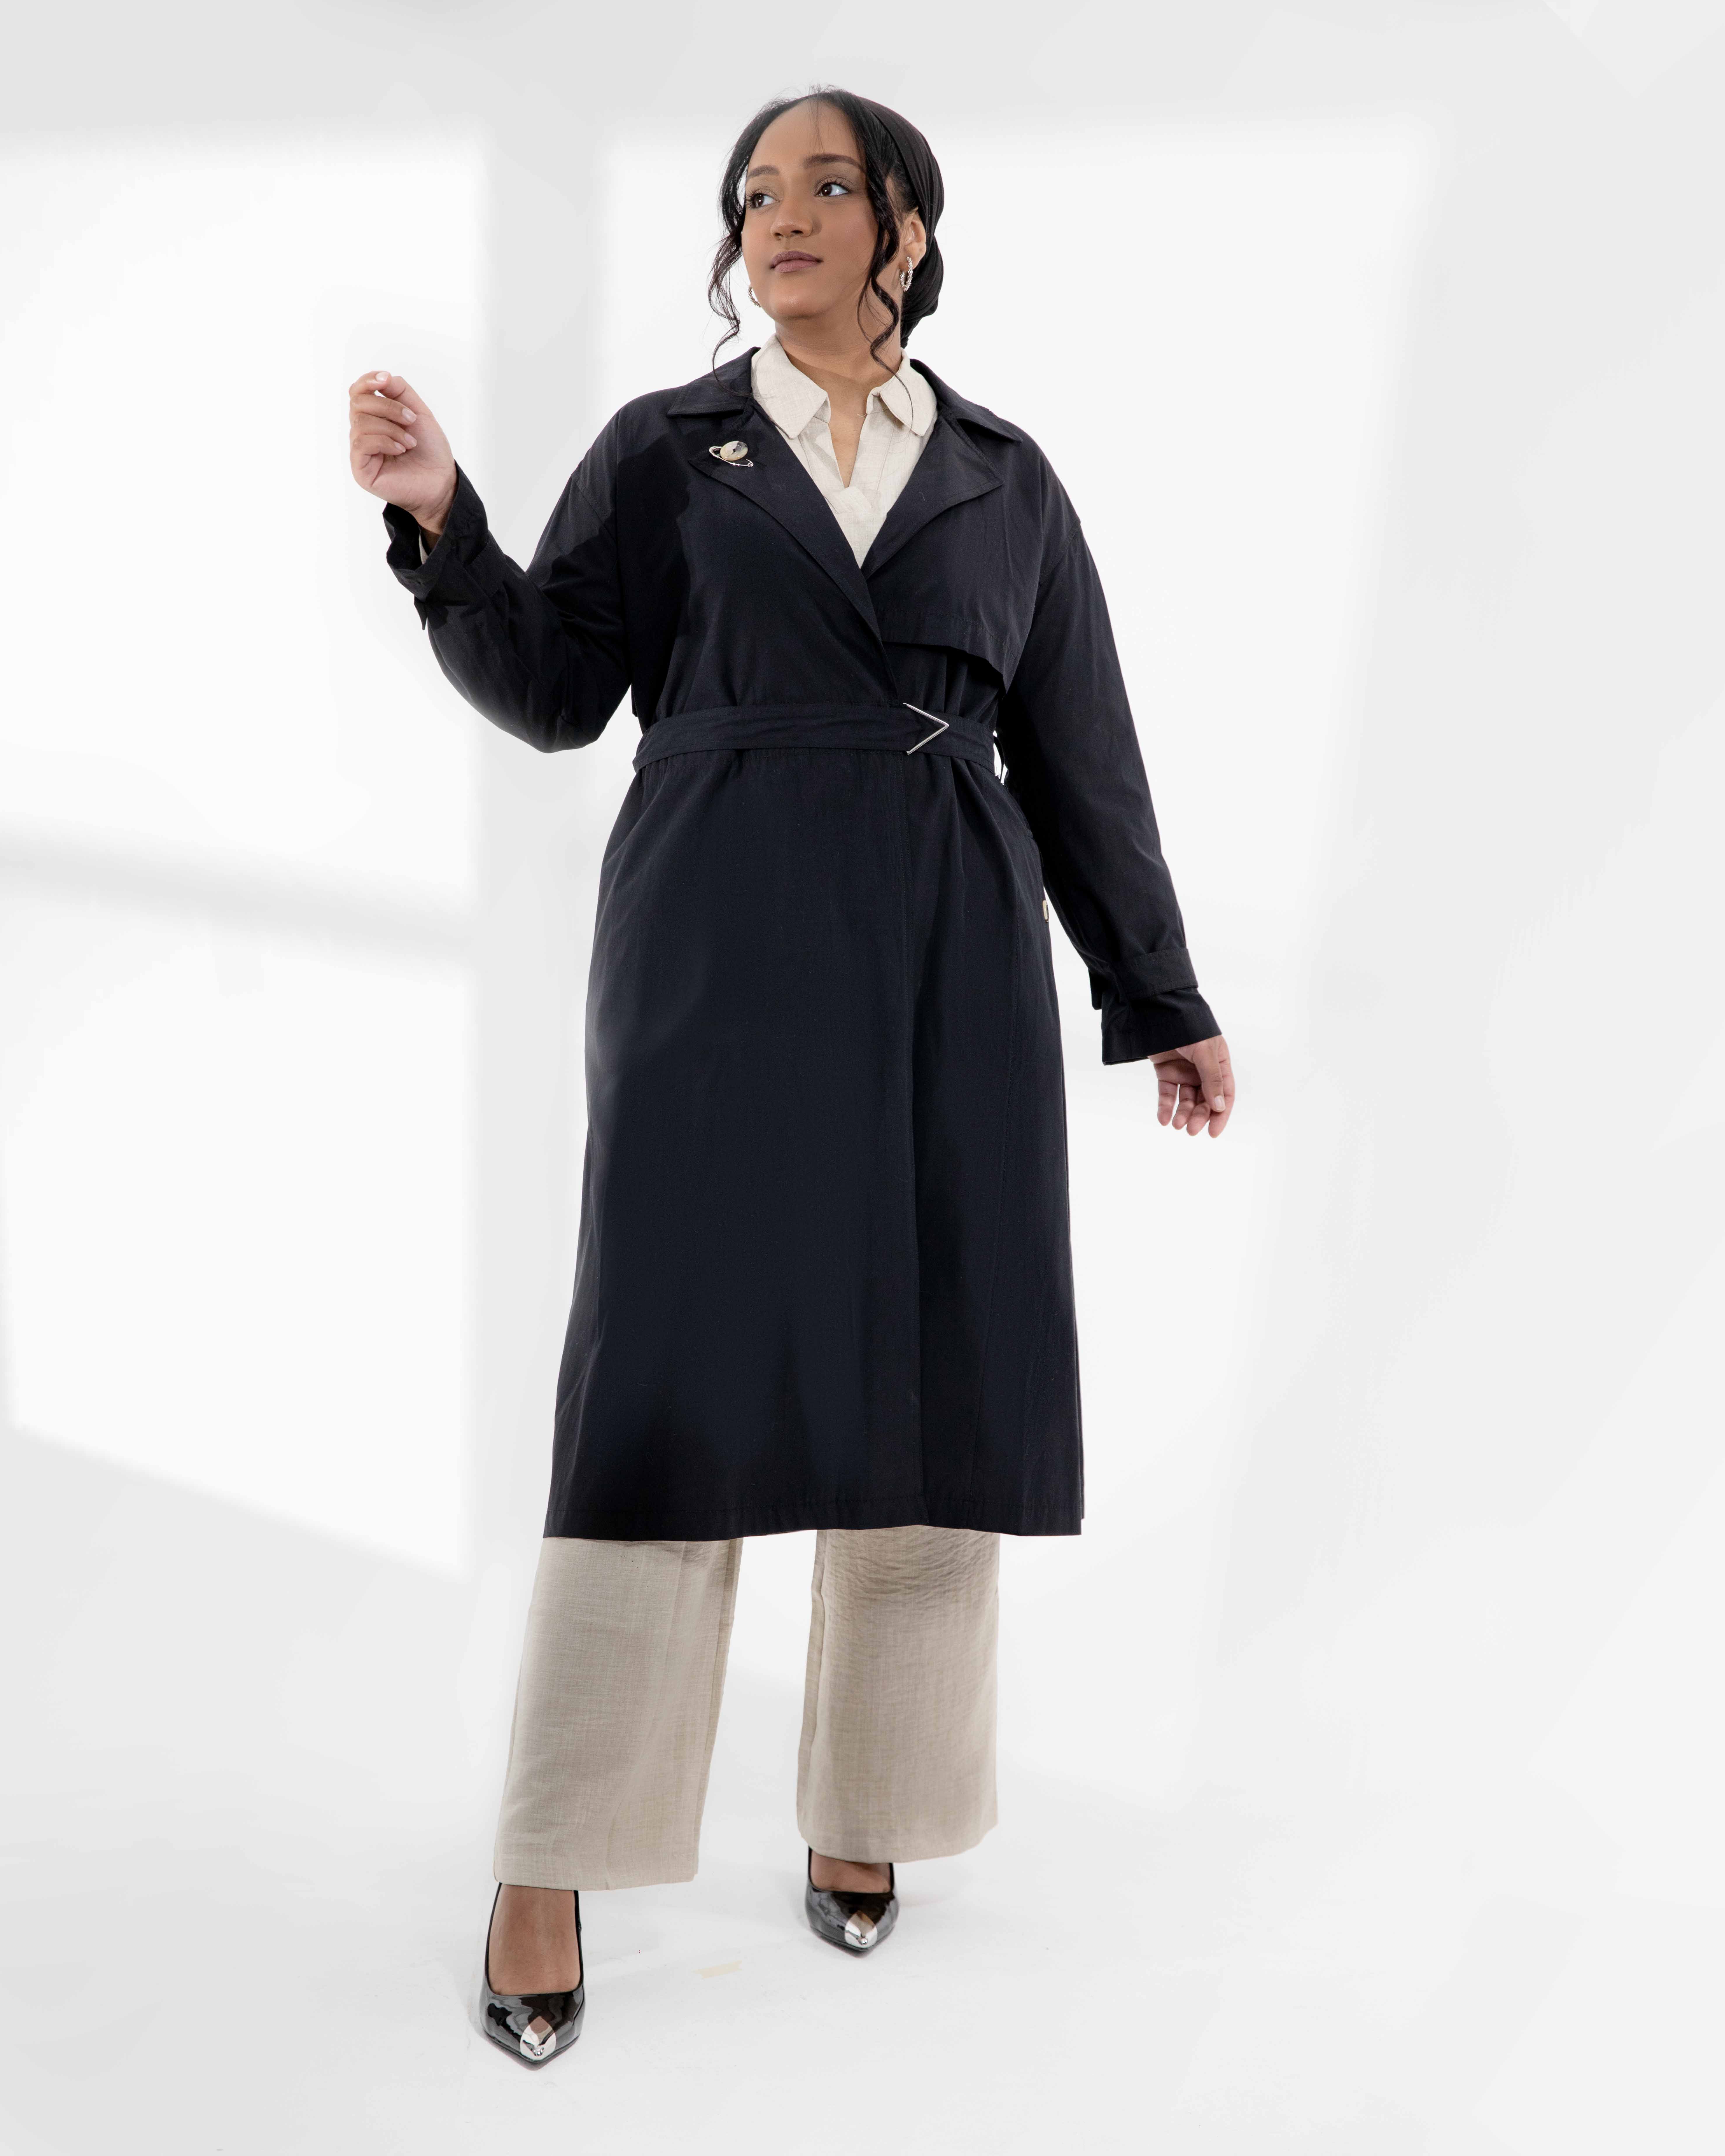 LaSaab | Collections - Coats - Classy Trench Coat